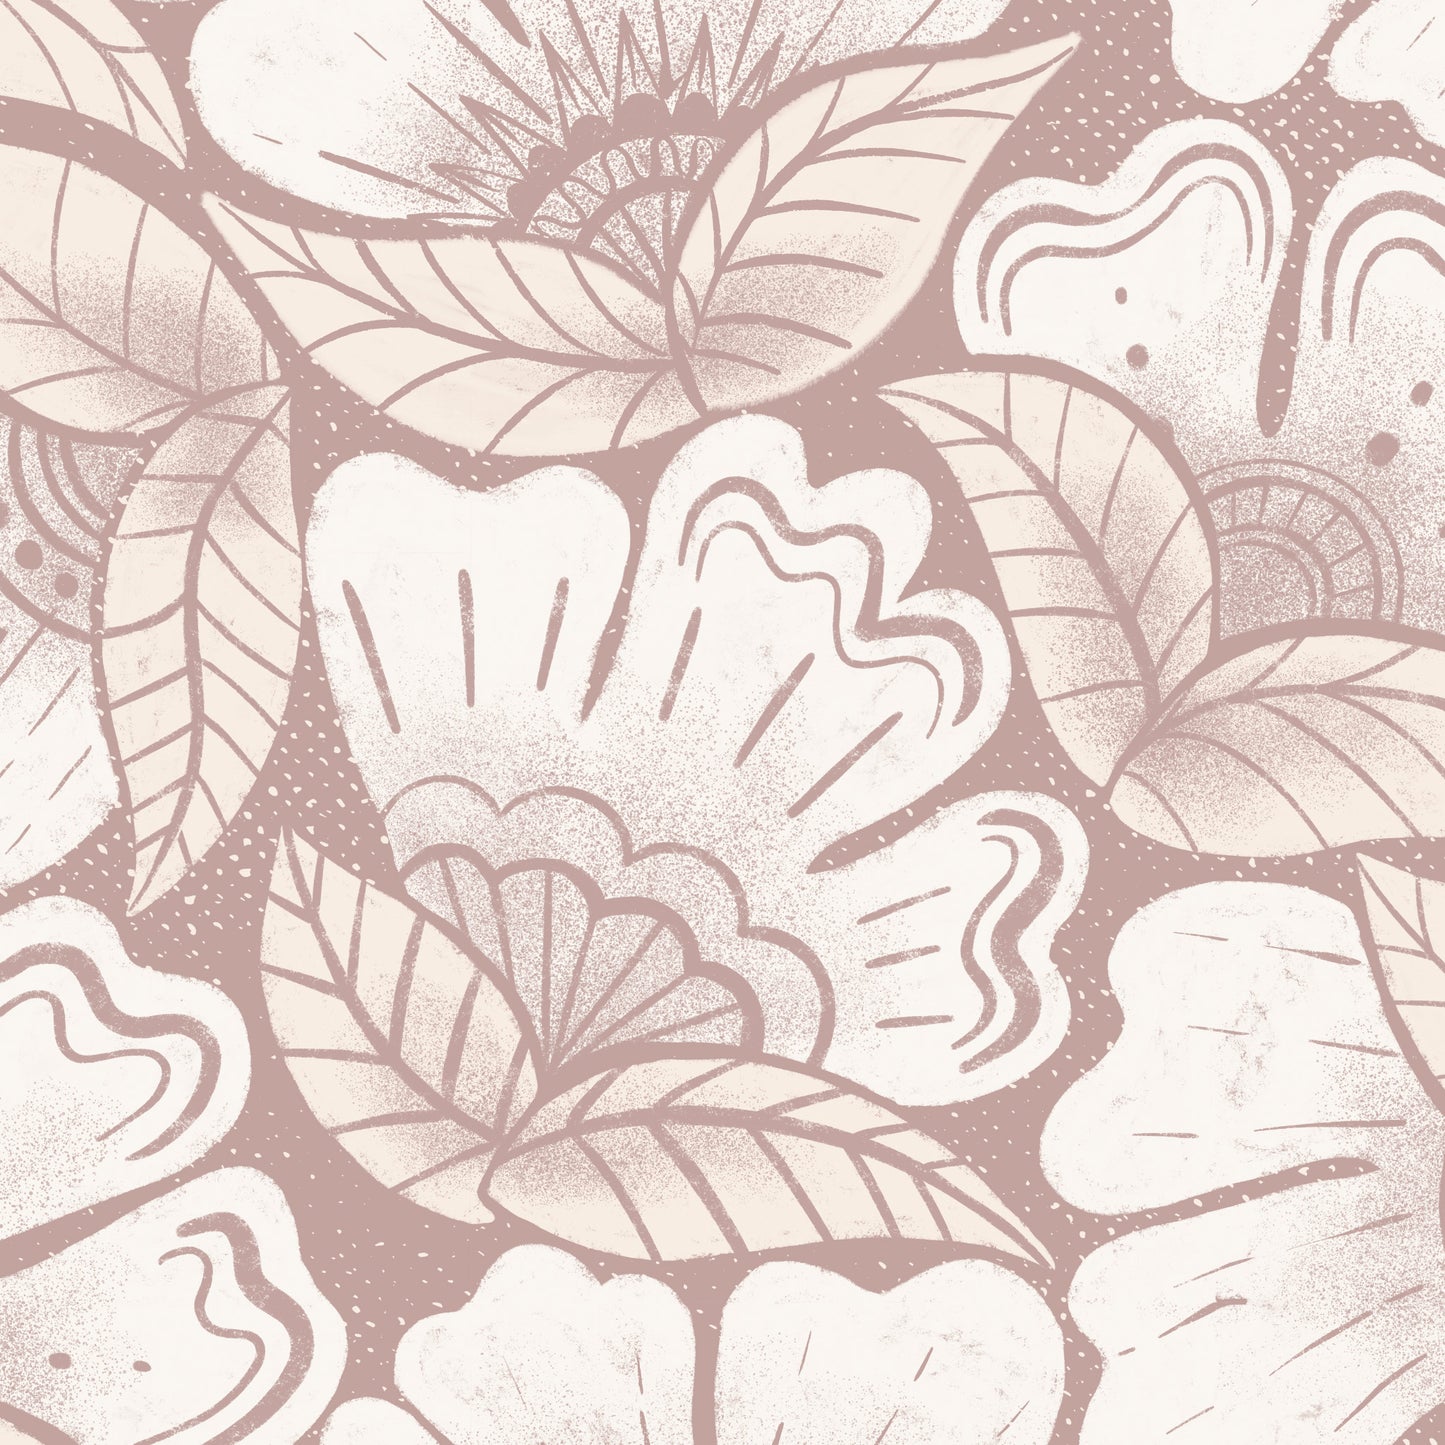 Scattered Flowers Wallpaper in Deep Mauve shown in a close up view.